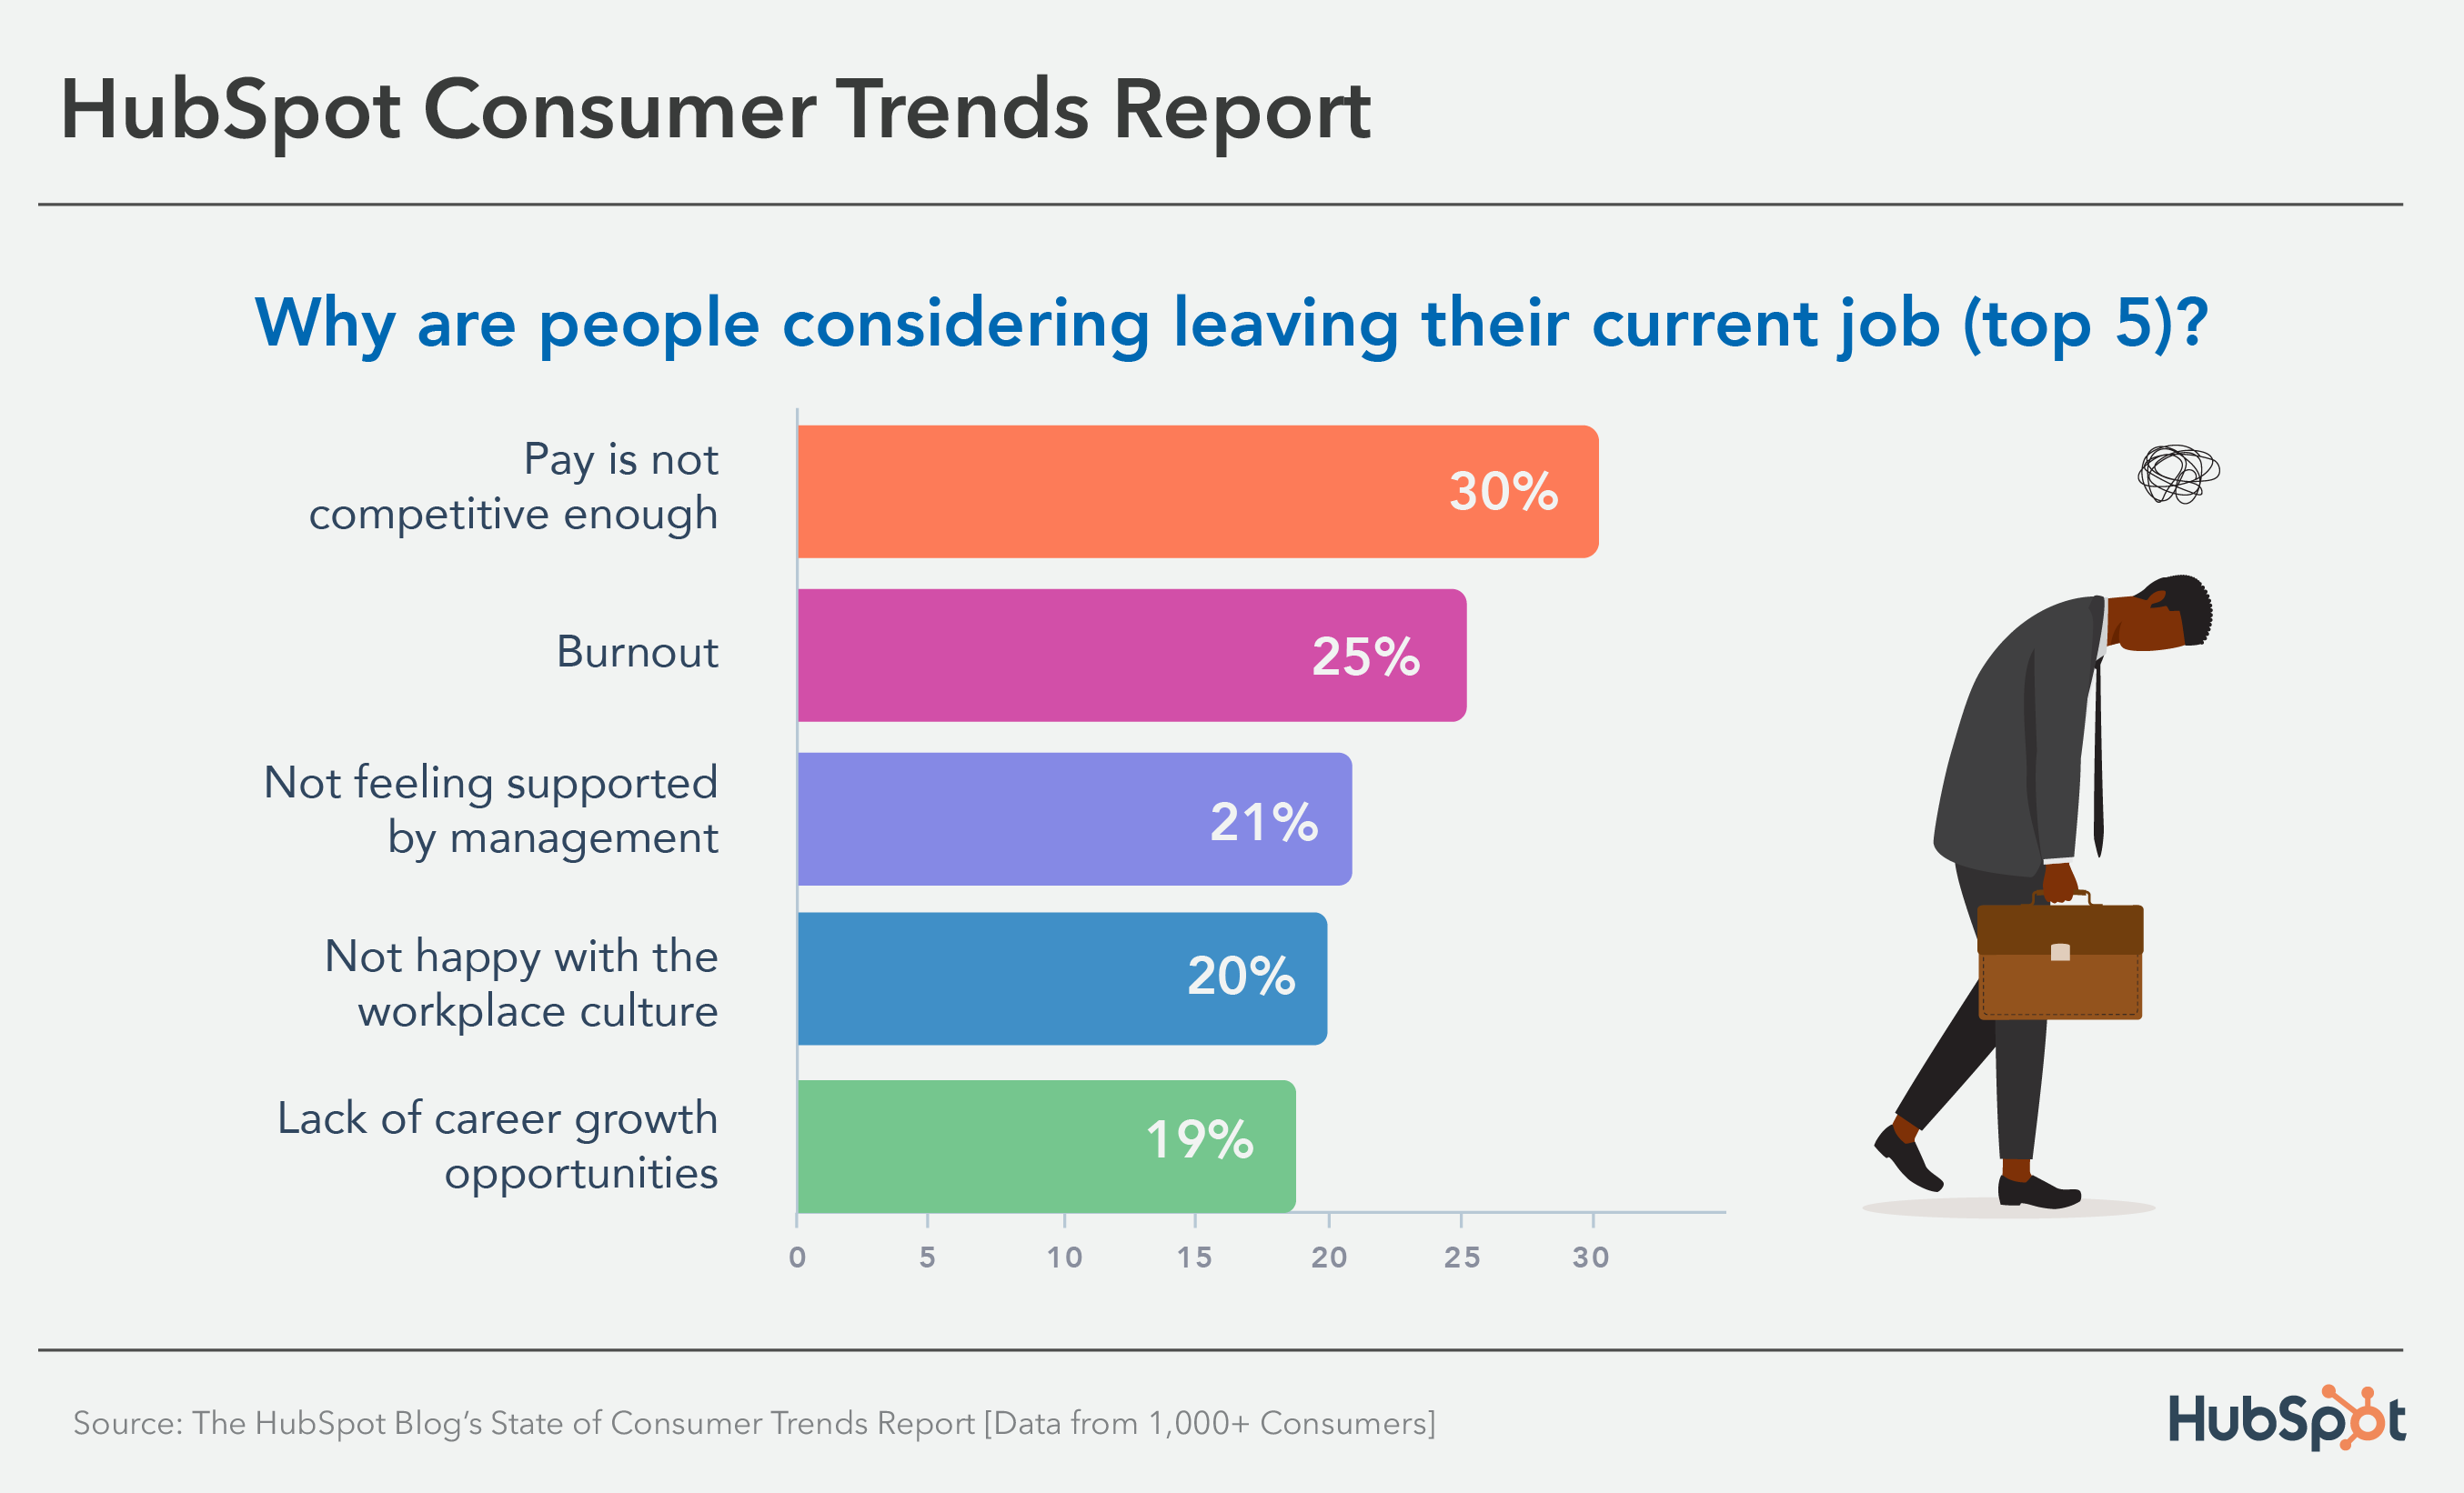 Top 5 Reasons Consumers Are Considering Quitting Their Jobs